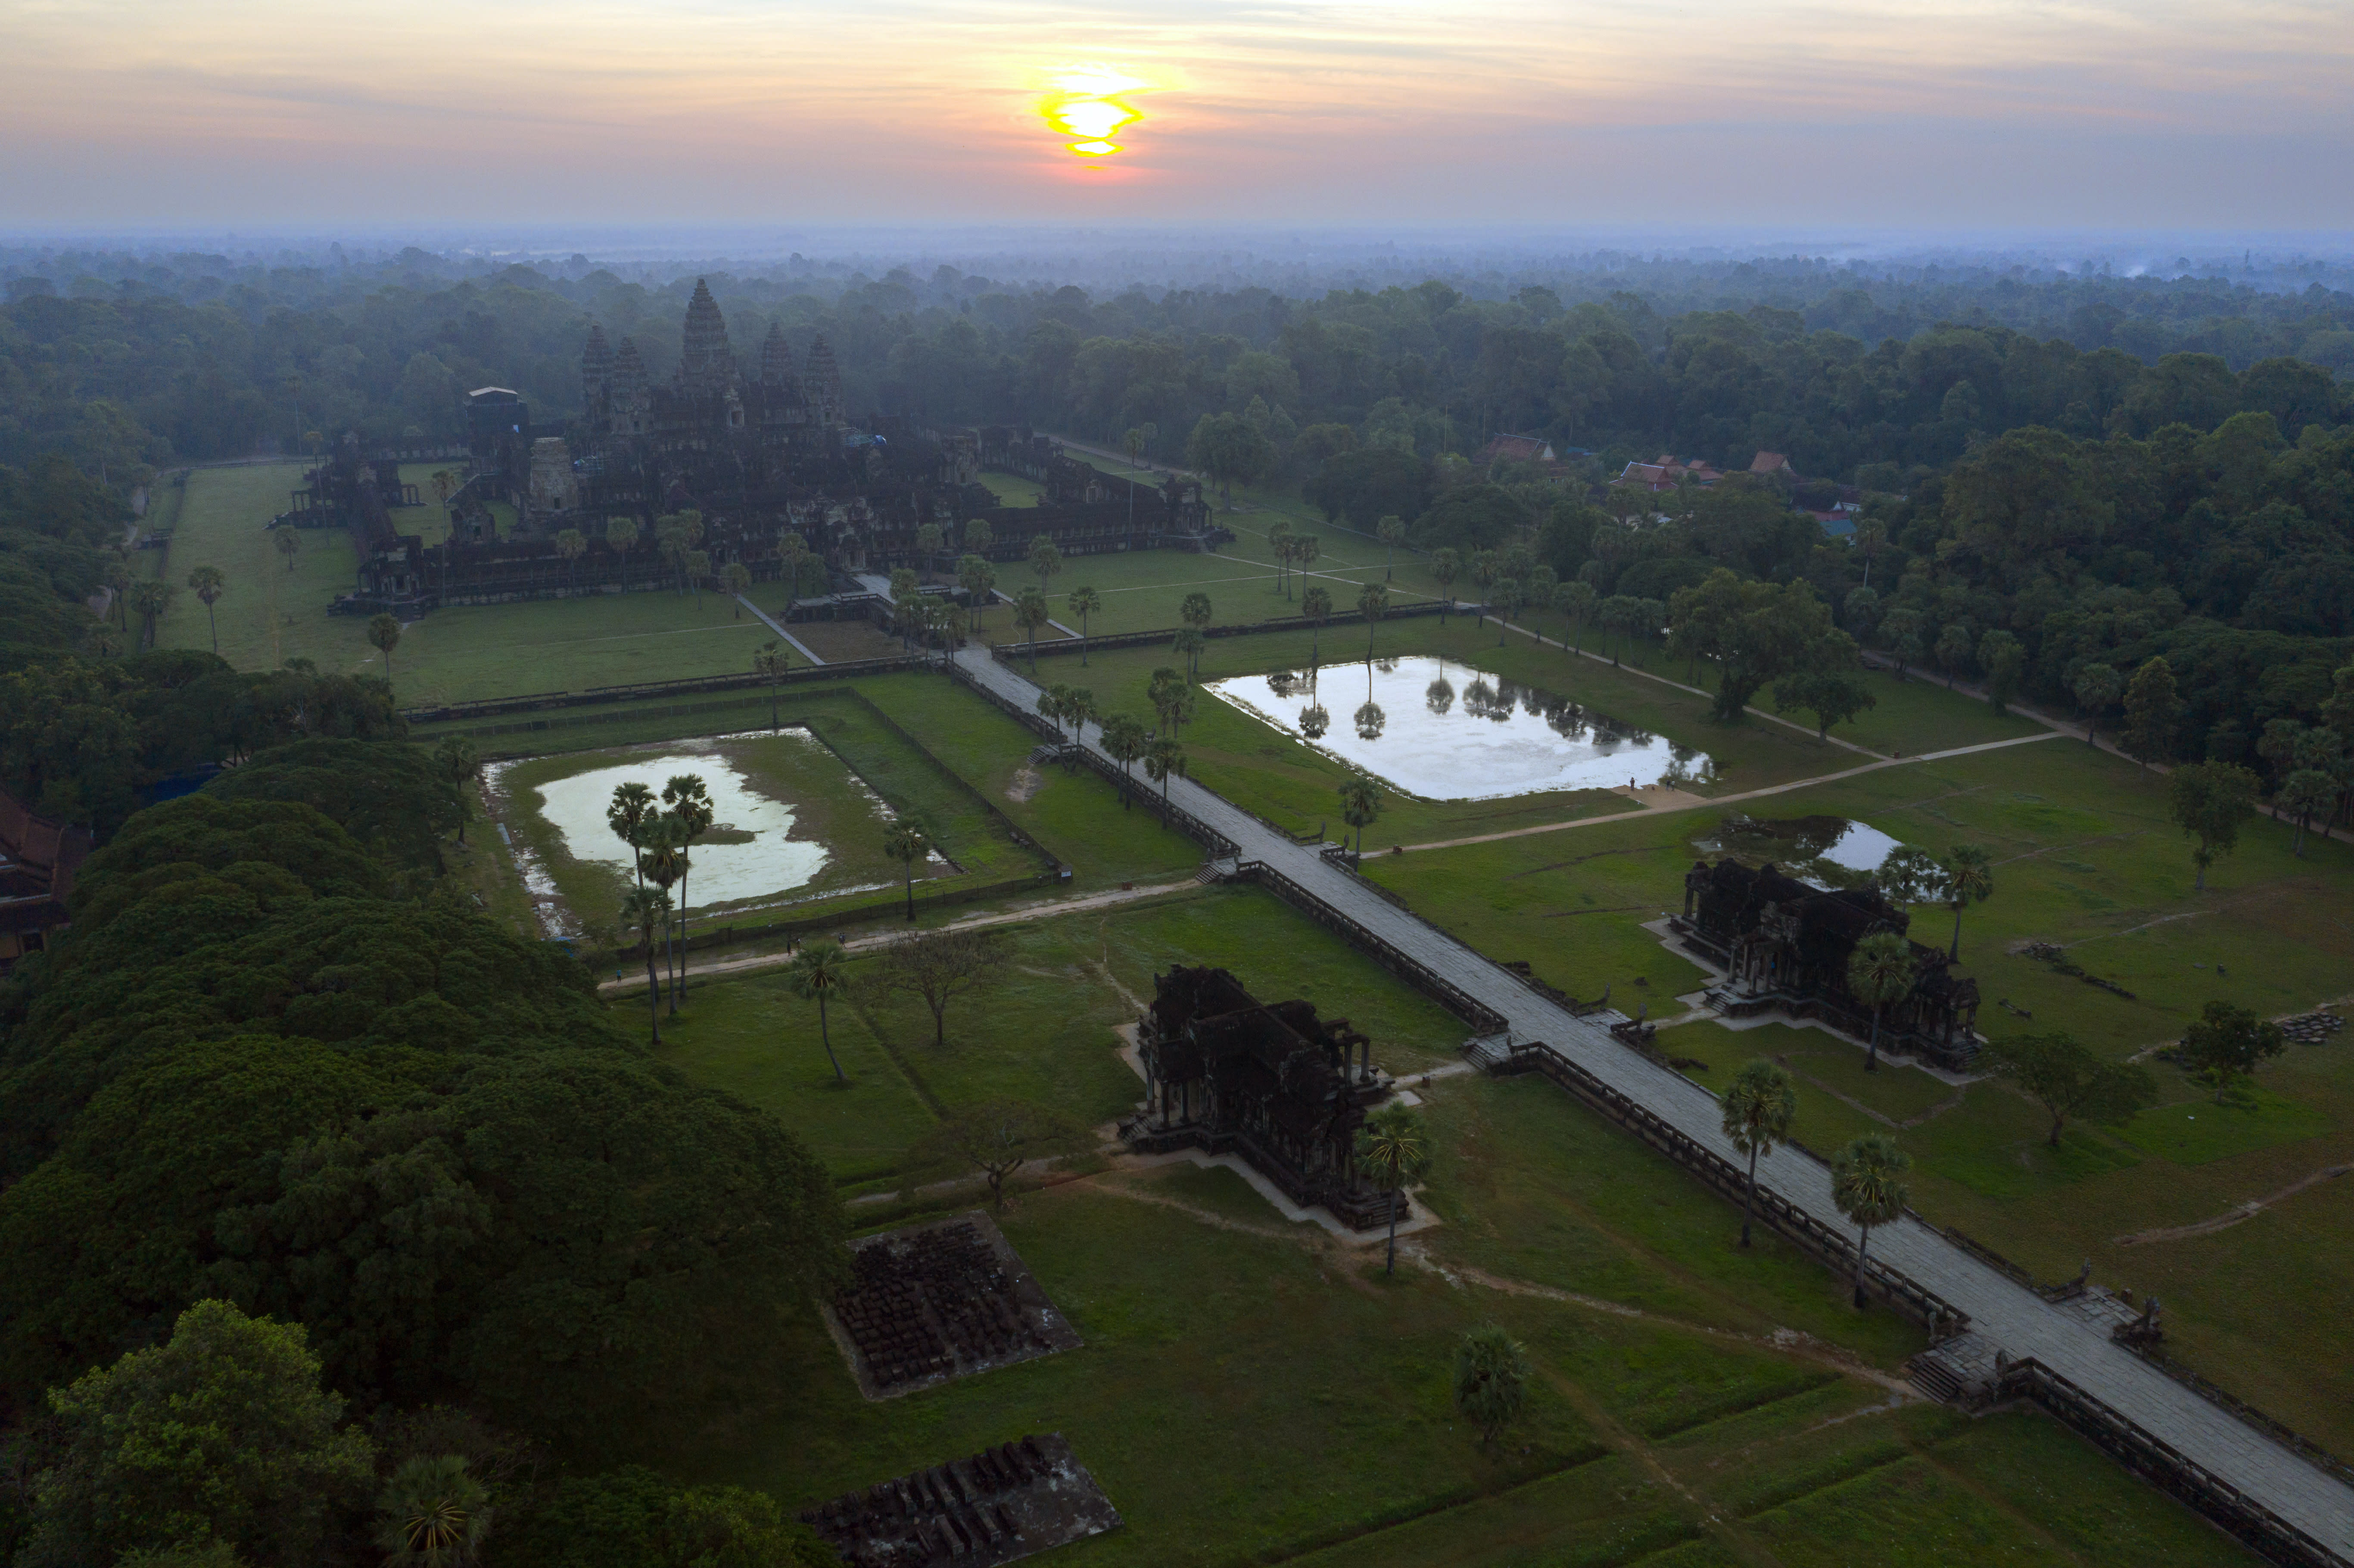 An aerial view of the ancient temple complex of Angkor Wat in Siem Reap, Cambodia at sunrise on Dec 7, 2021. Cambodia has been open to foreign tourists for months, but in this time of Covid-19, few have made the trip. 